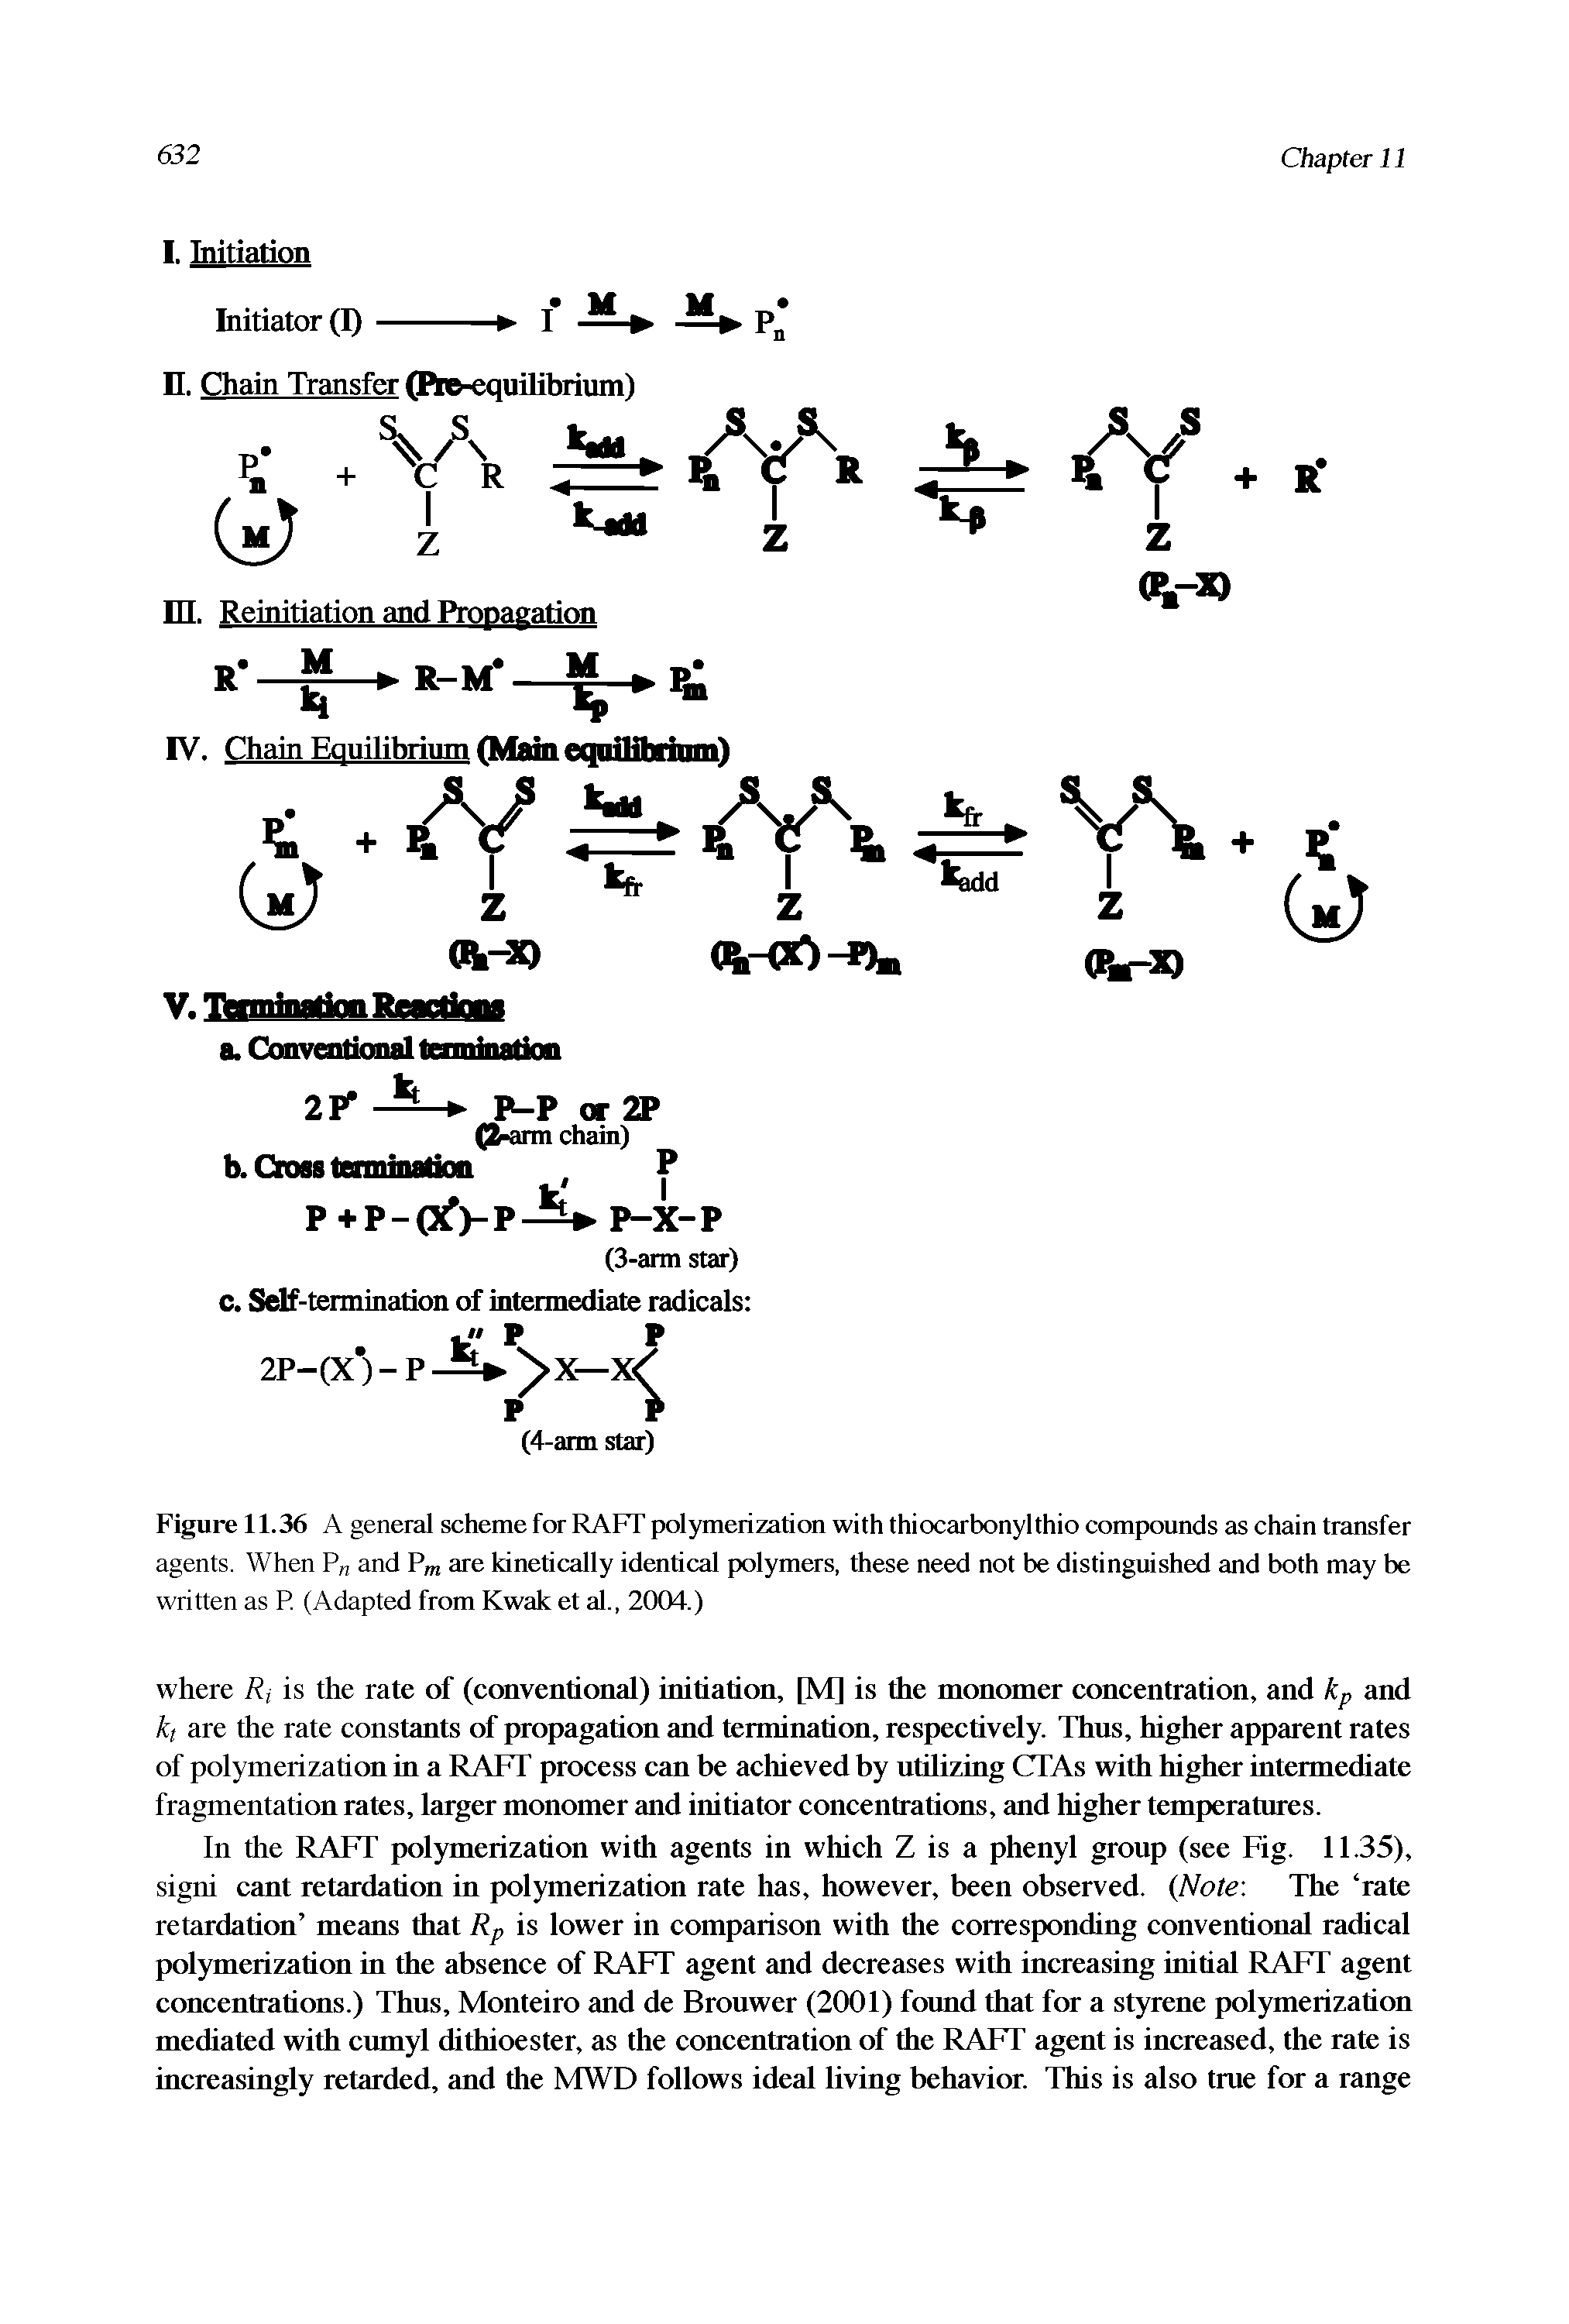 Figure 11.36 A general scheme for RAFT polymerization with thiocarbonylthio compounds as chain transfer agents. When P and Pm are kinetically identical polymers, these need not be distinguished and both may be written as P. (Adapted from Kwak et al., 2004.)...